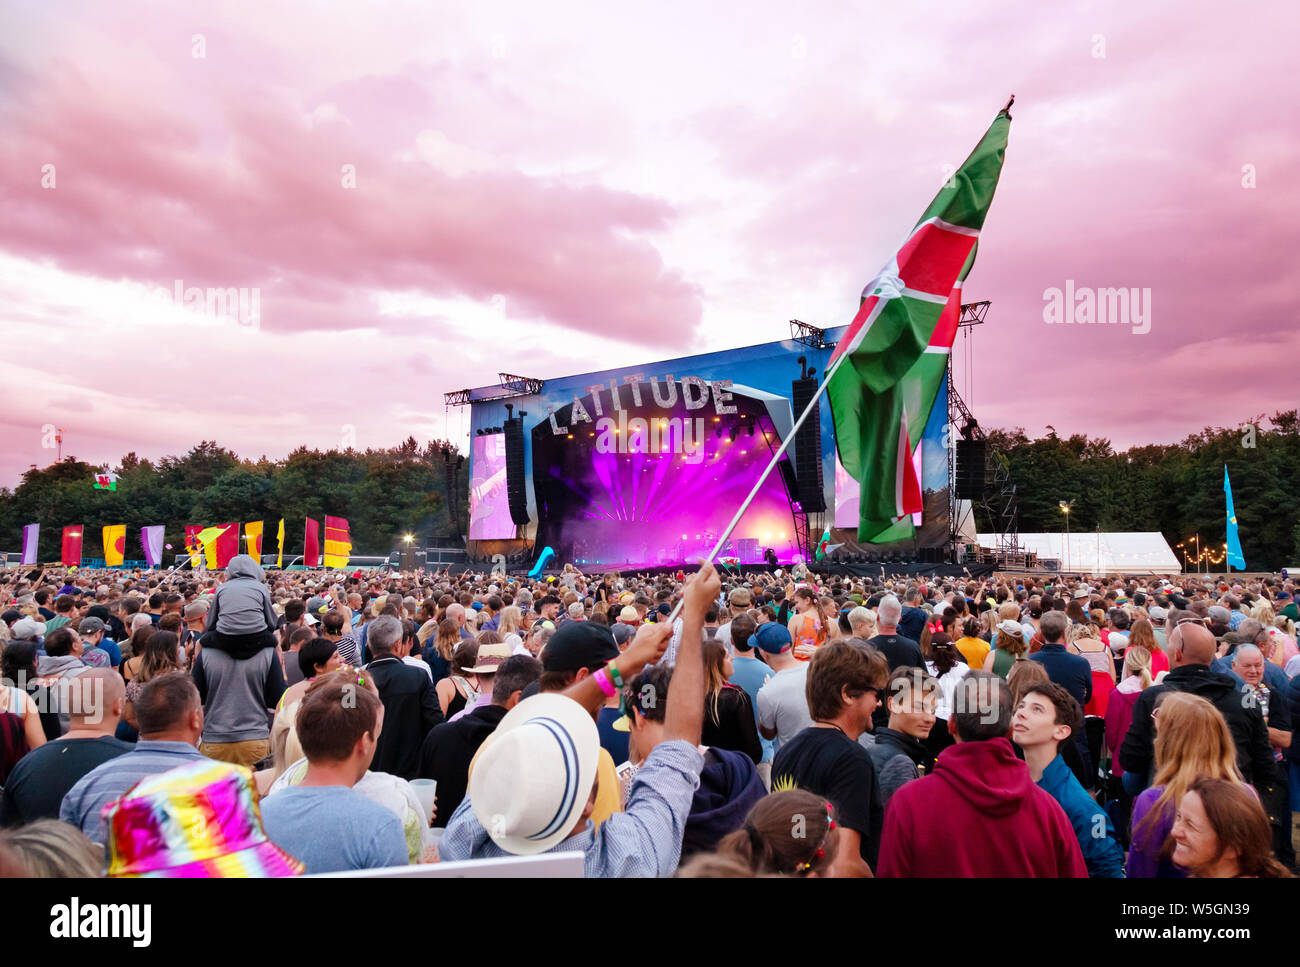 Latitude Festival UK - audience watching the Stereophonics on the main Obelisk Stage at sunset, the Arena, Suffolk Latitude Music Festival UK 2019 Stock Photo